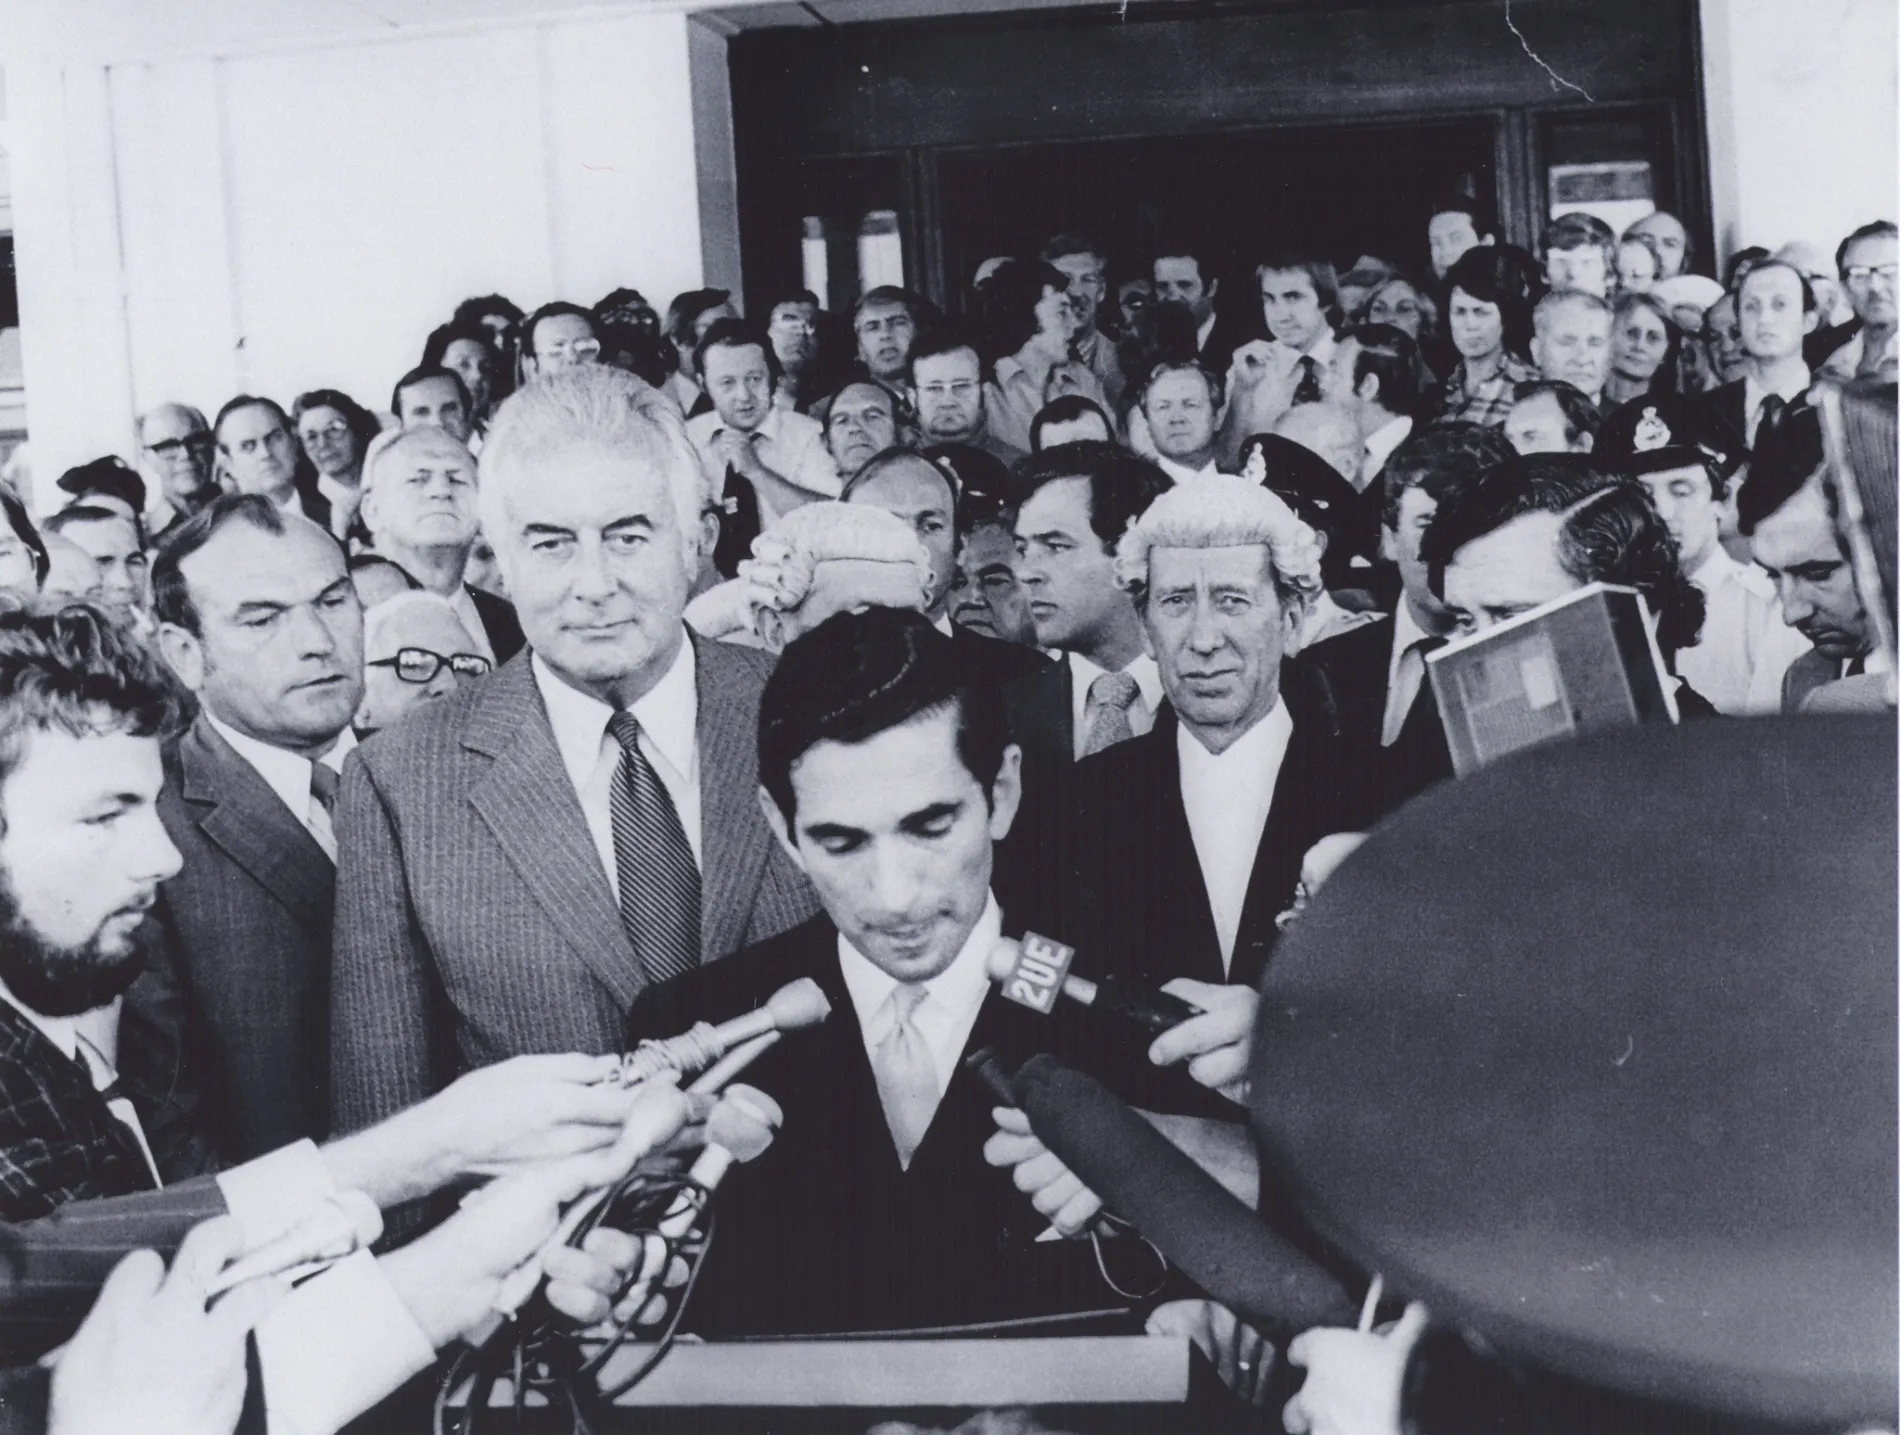 A black and white photo of a Gough Whitlam on the steps of Parliament House surrounded by a crowd of men in suits. One many at the front speak from a lecturn as journalists put their microphones in his face. A man in the background wears barrister's wig and looks at the camera. 